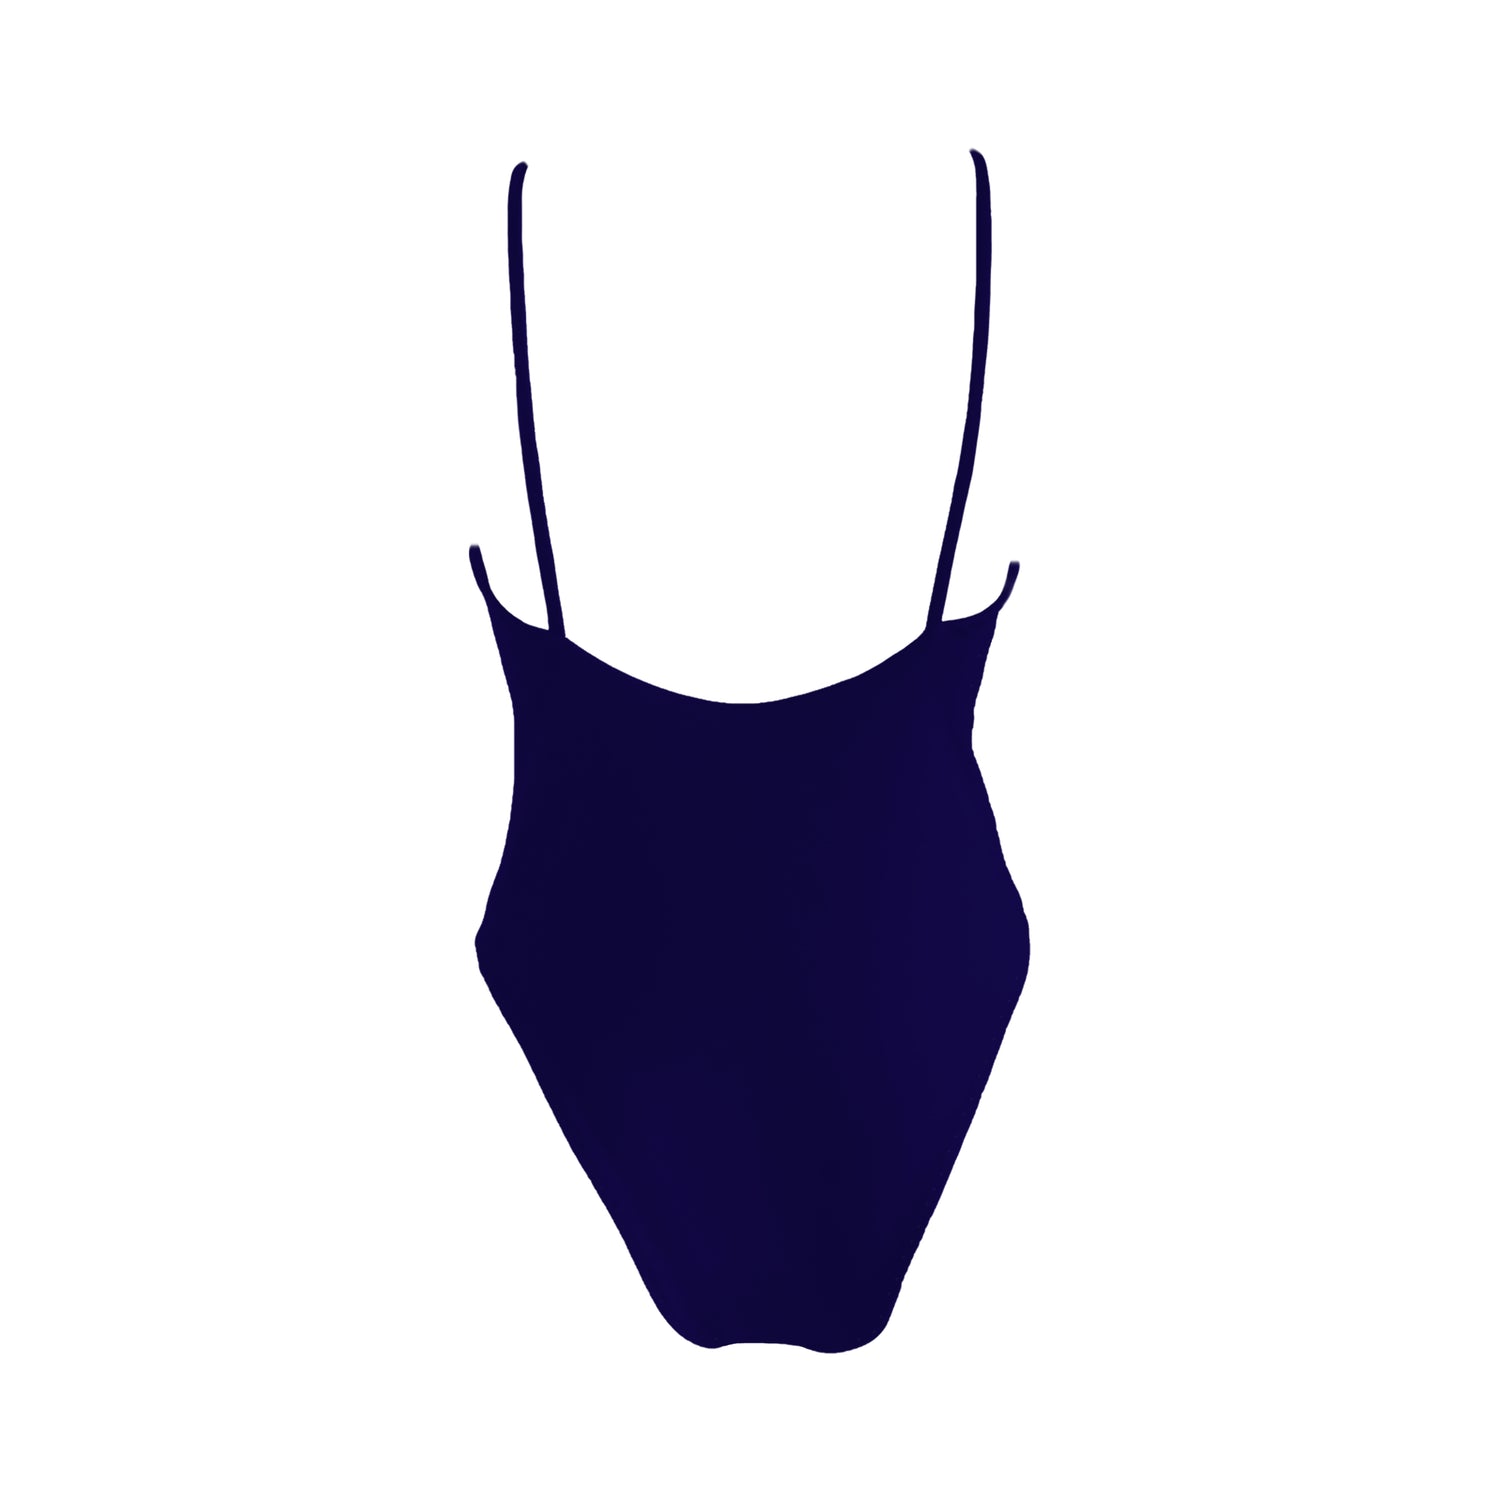 Back view of midnight navy Asymmetric plunging v-neck one piece swimsuit with strap across connecting the front straps, high cut legs, and cheeky bum coverage.